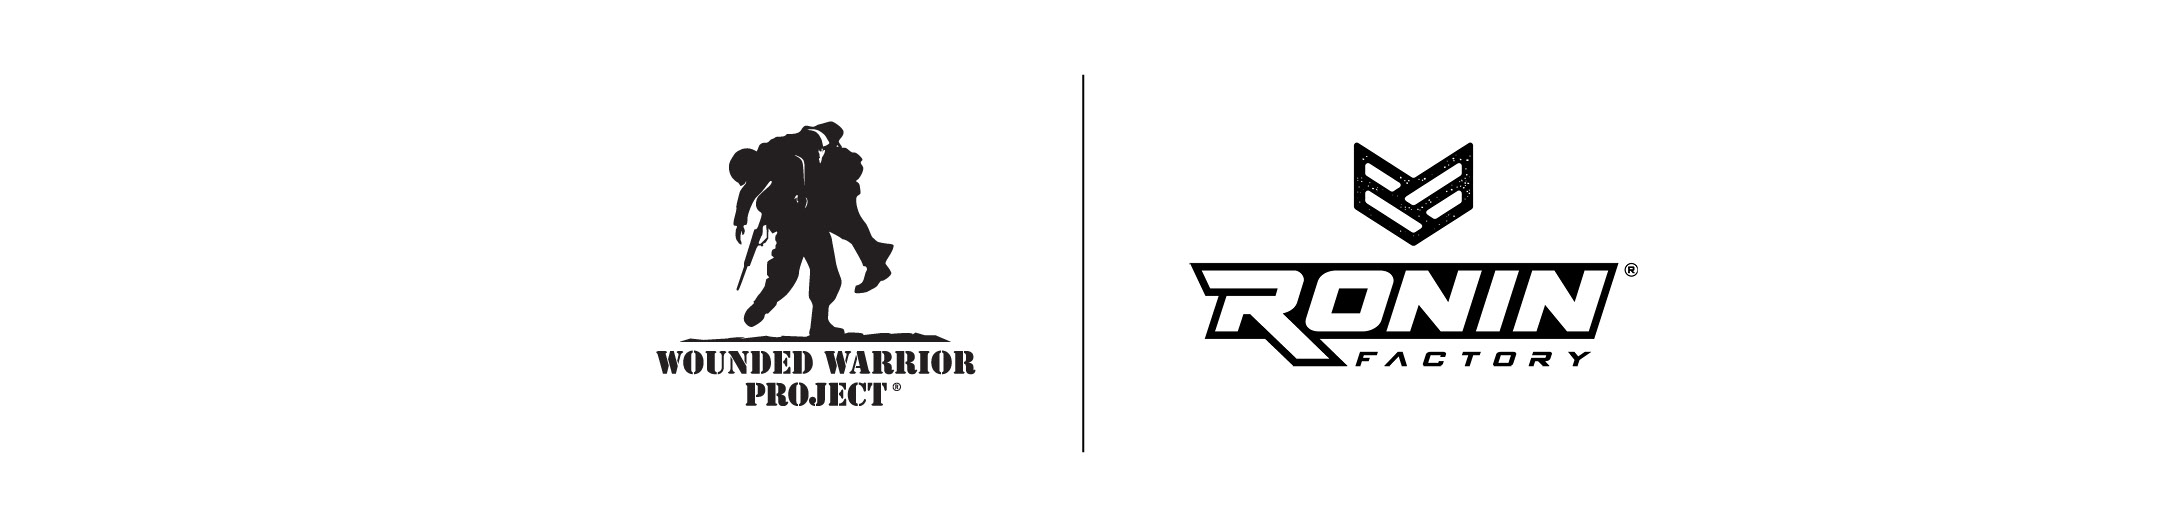 WWP and Ronin Factory